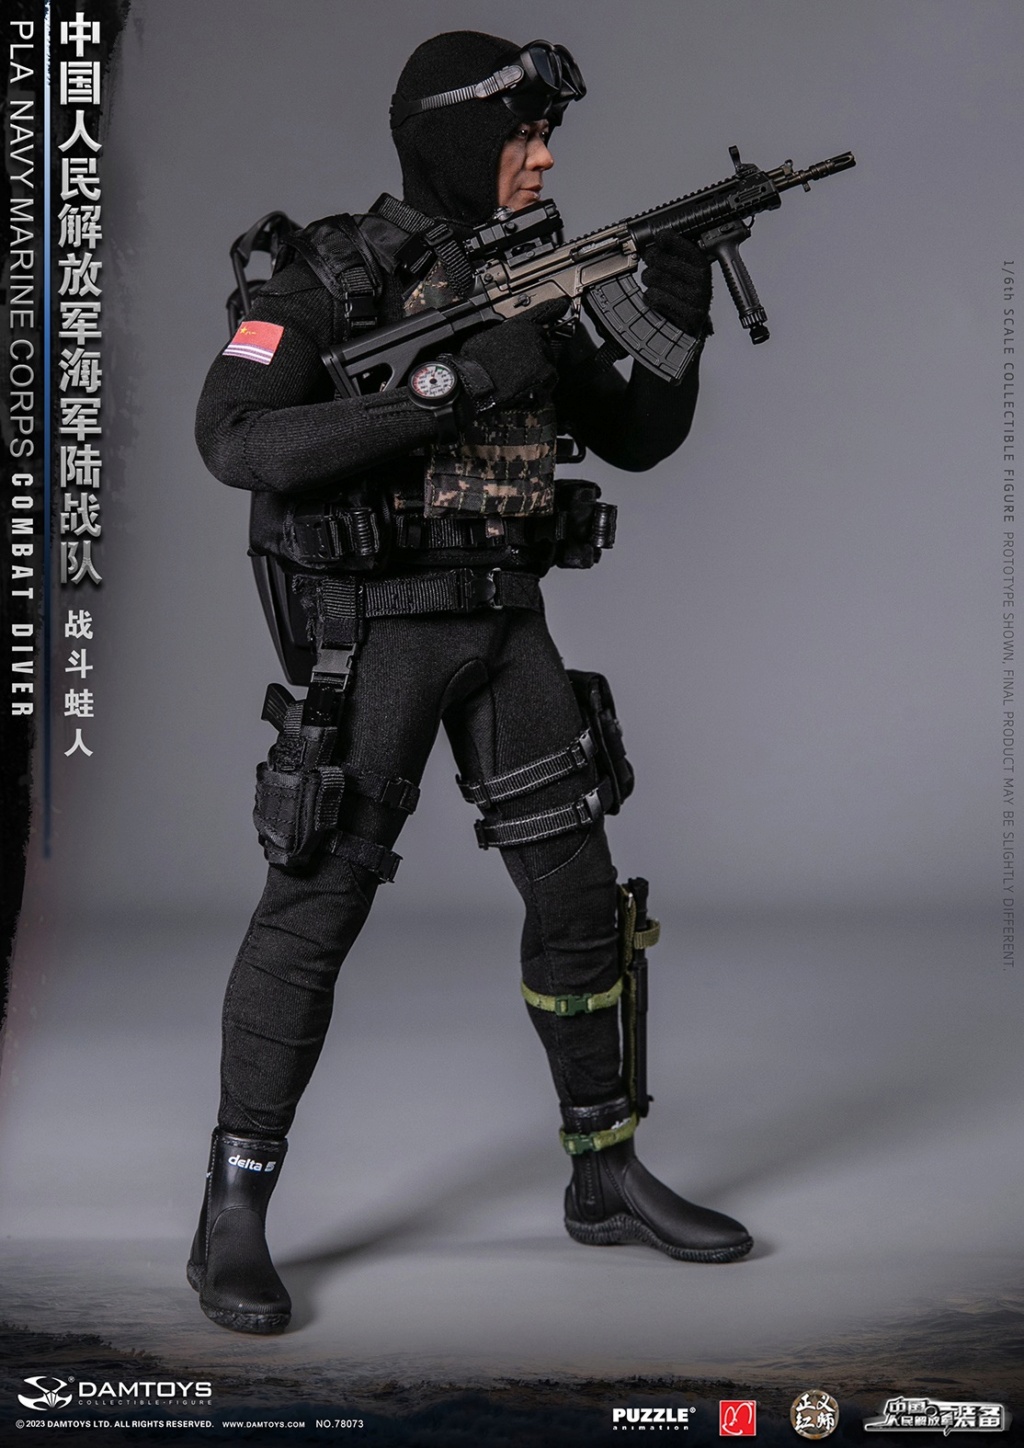 NEW PRODUCT: DAMToys: 1/6 Chinese People's Liberation Army Marine Corps - Combat Frogman Action Figure #78073 14302512